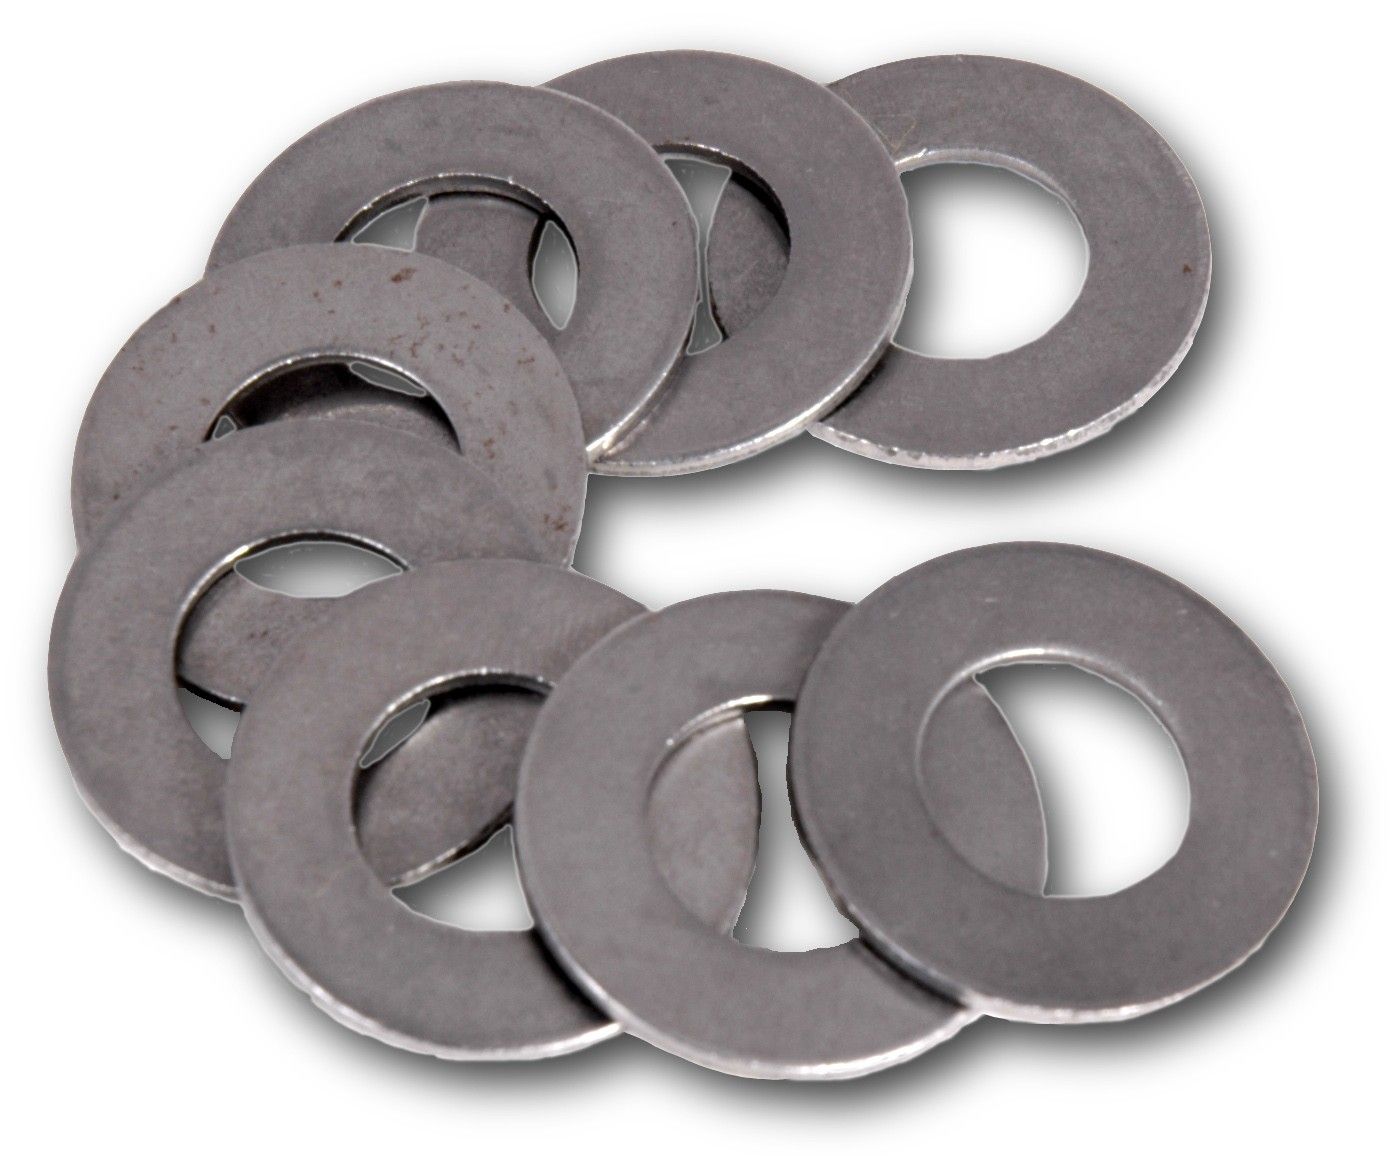 PLAIN WASHER 6BA Mild Steel Zinc Clear Passivated 10 Pieces MBE005c